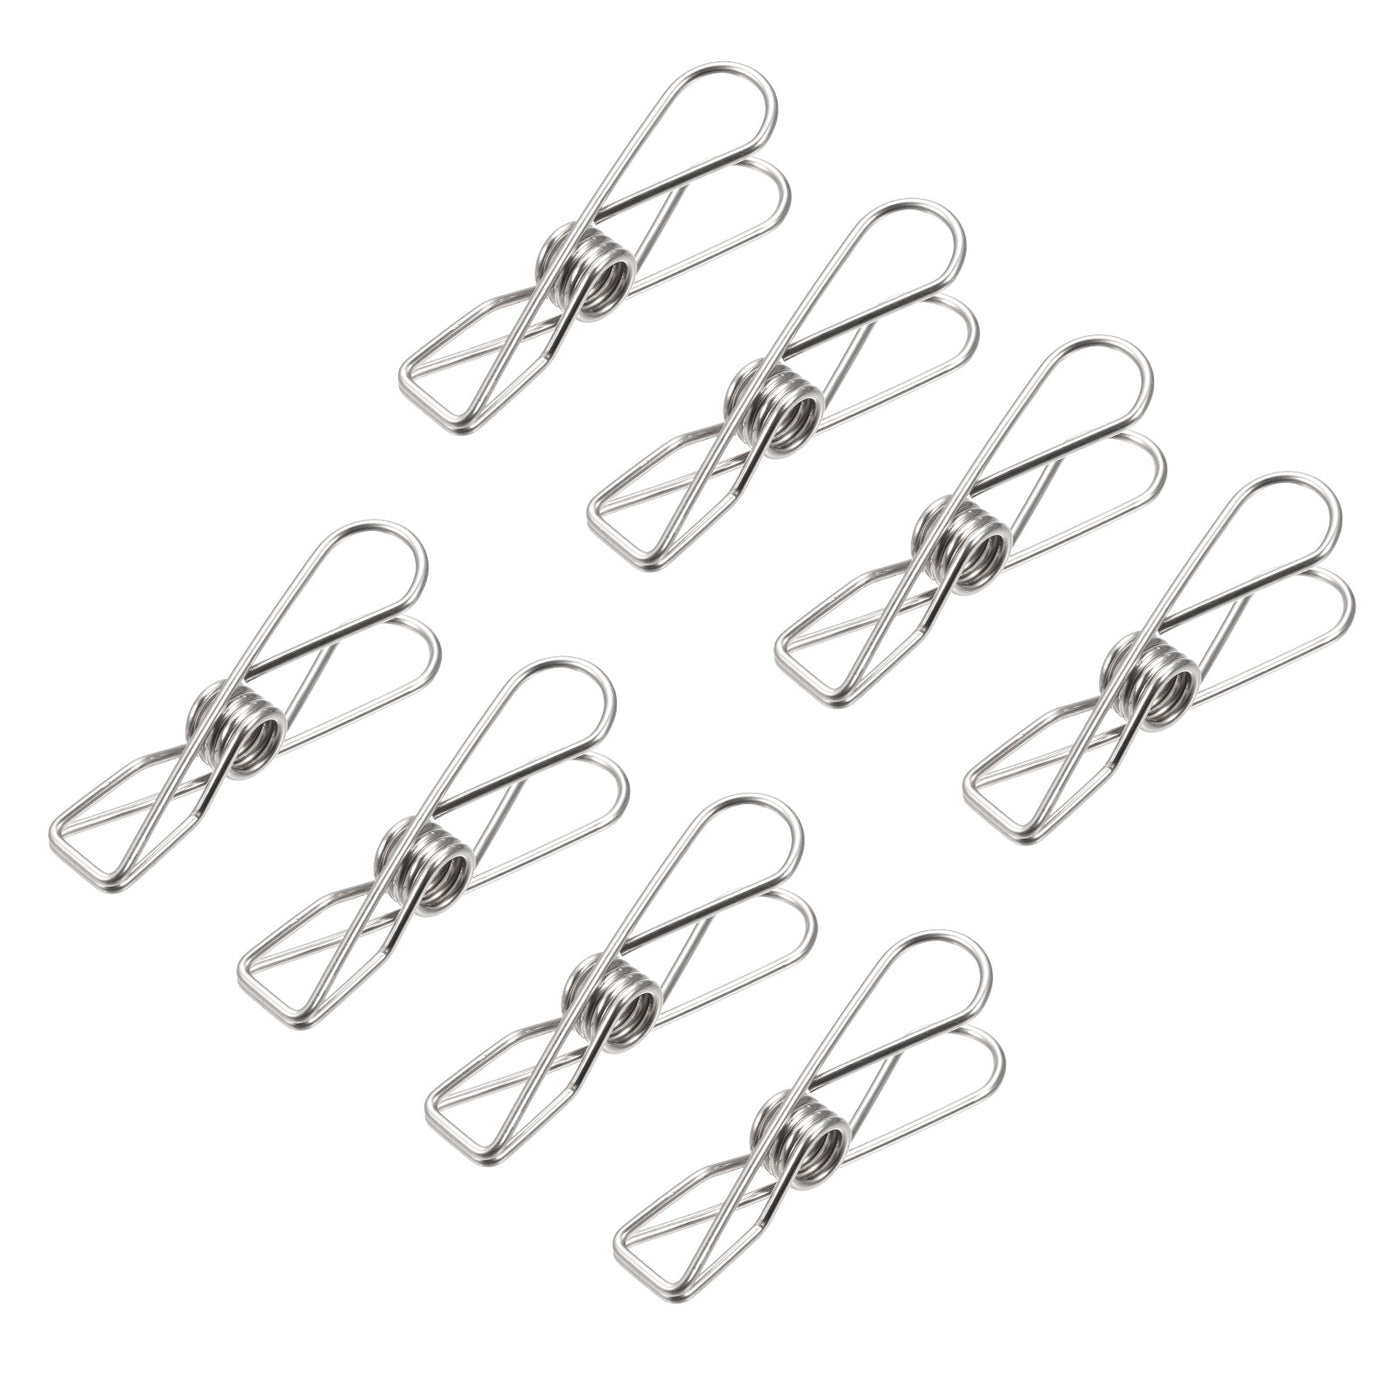 uxcell Uxcell Tablecloth Clips - 65mm Stainless Steel Wire Clamps for Fixing Table Cloth Hanging Clothes, 28 Pcs